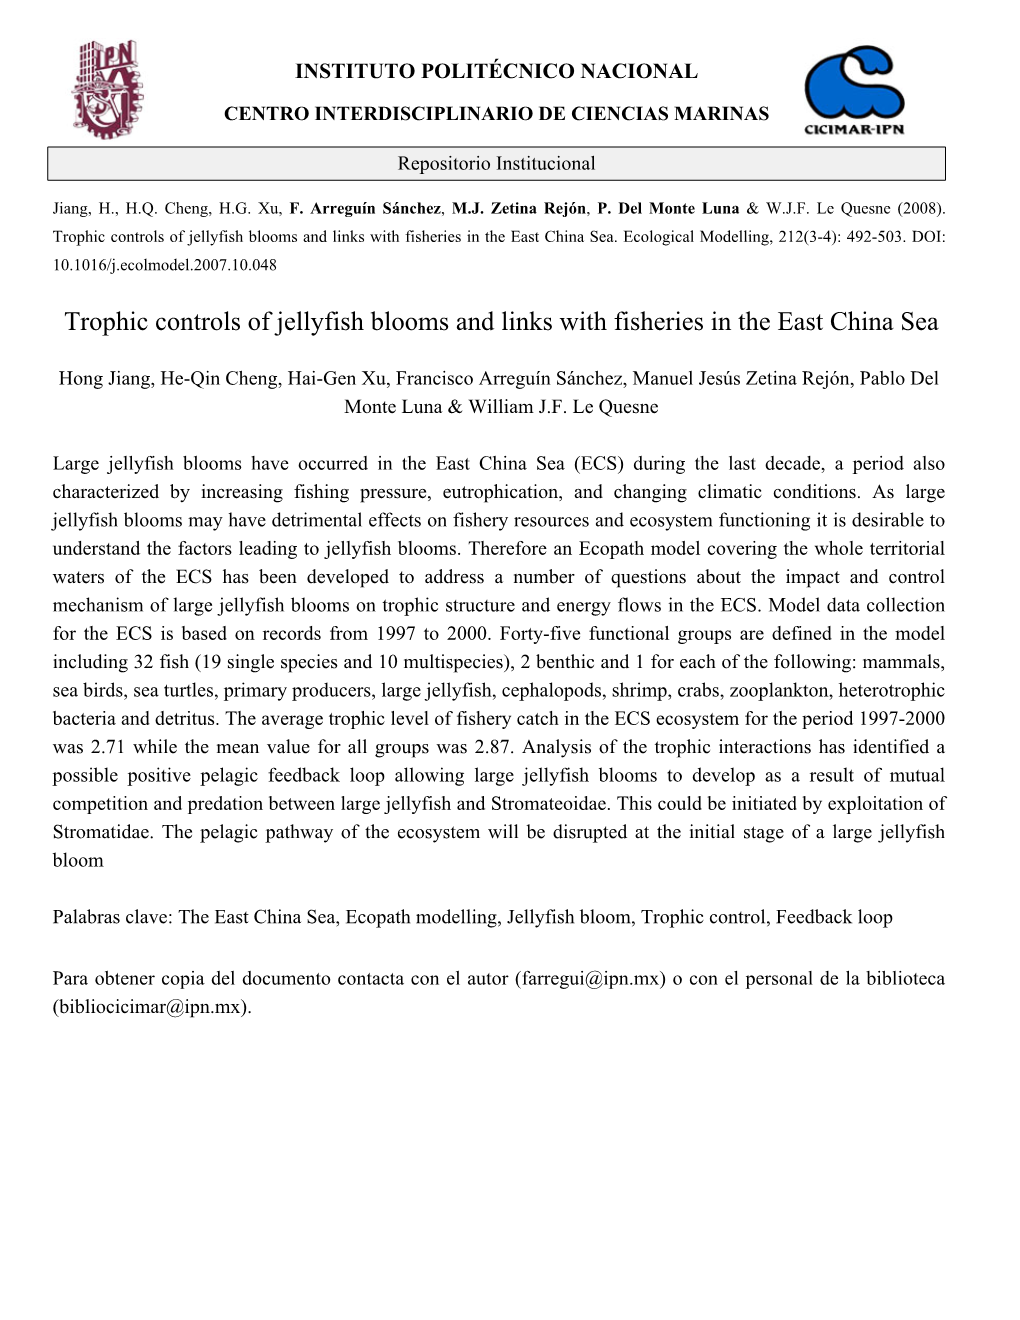 Trophic Controls of Jellyfish Blooms and Links with Fisheries in the East China Sea